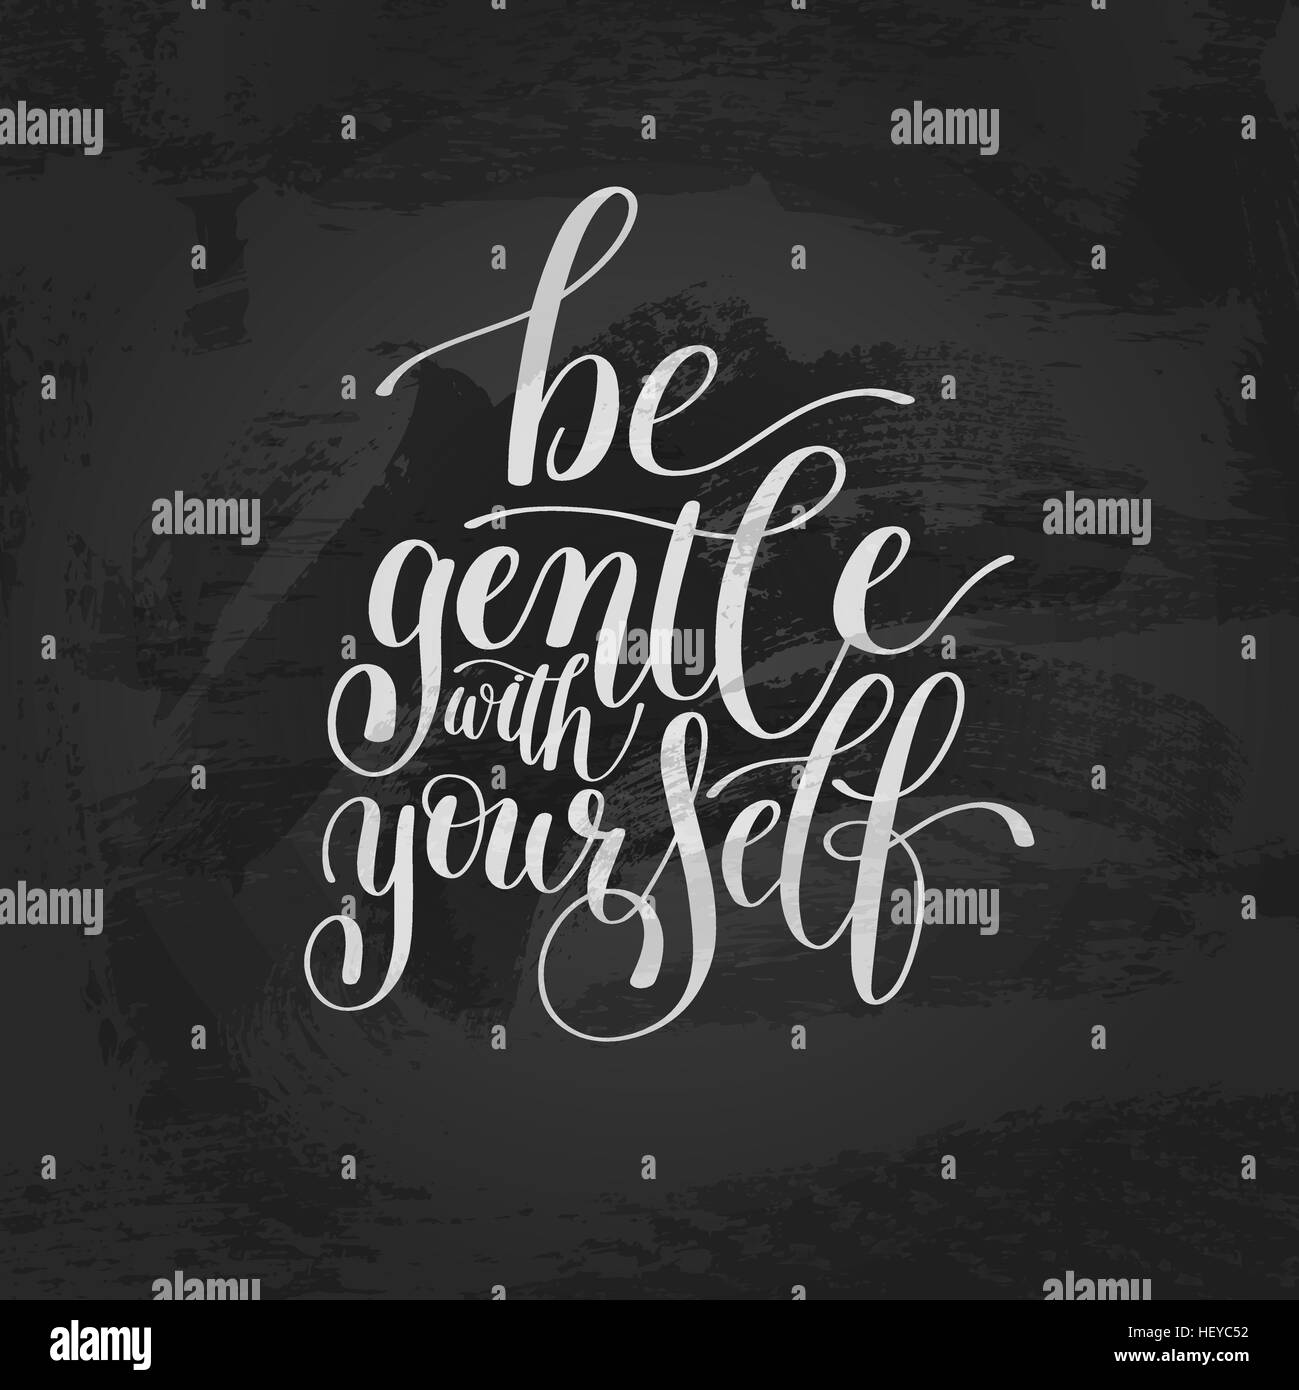 Be Gentle With Yourself. Motivational Quote. Hand Drawn Text Phr Stock Vector